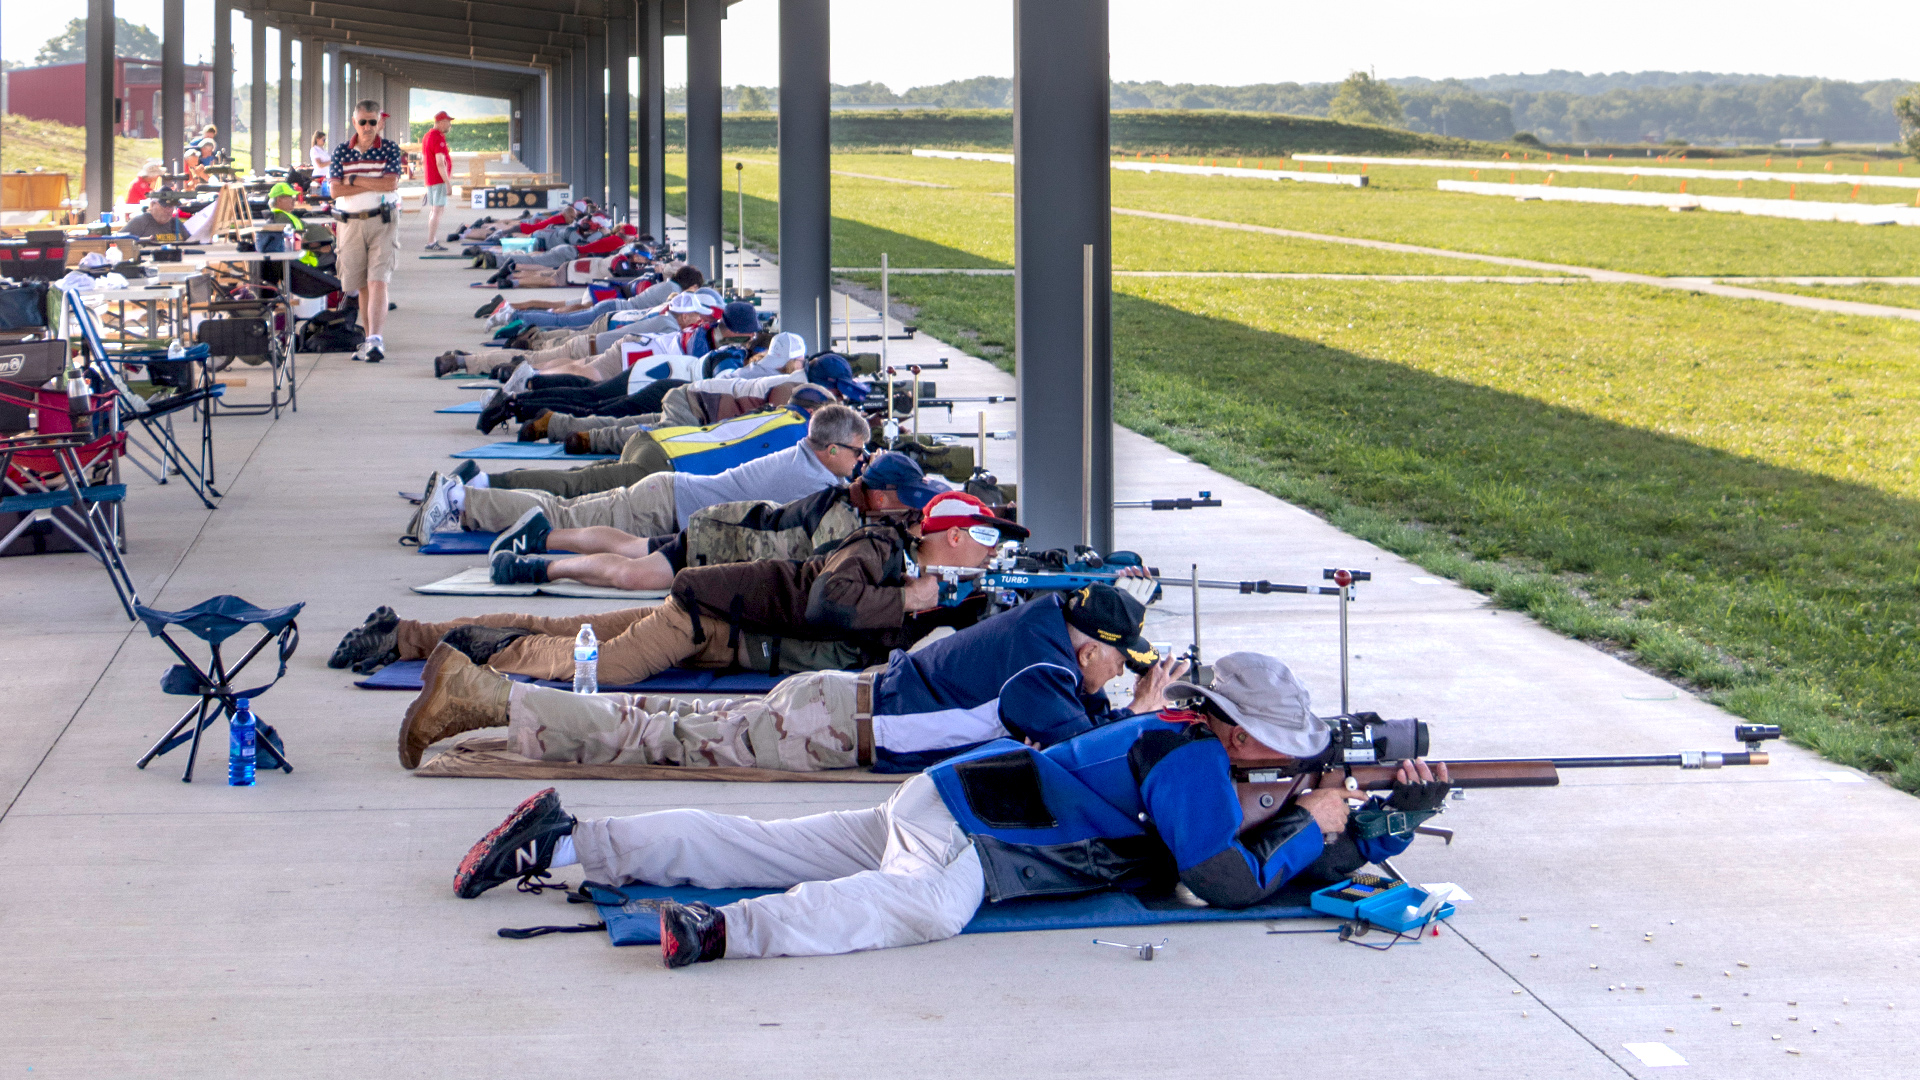 Here's How The U.S. Pershing Team Won Its 11th Trophy | An NRA Shooting Sports Journal